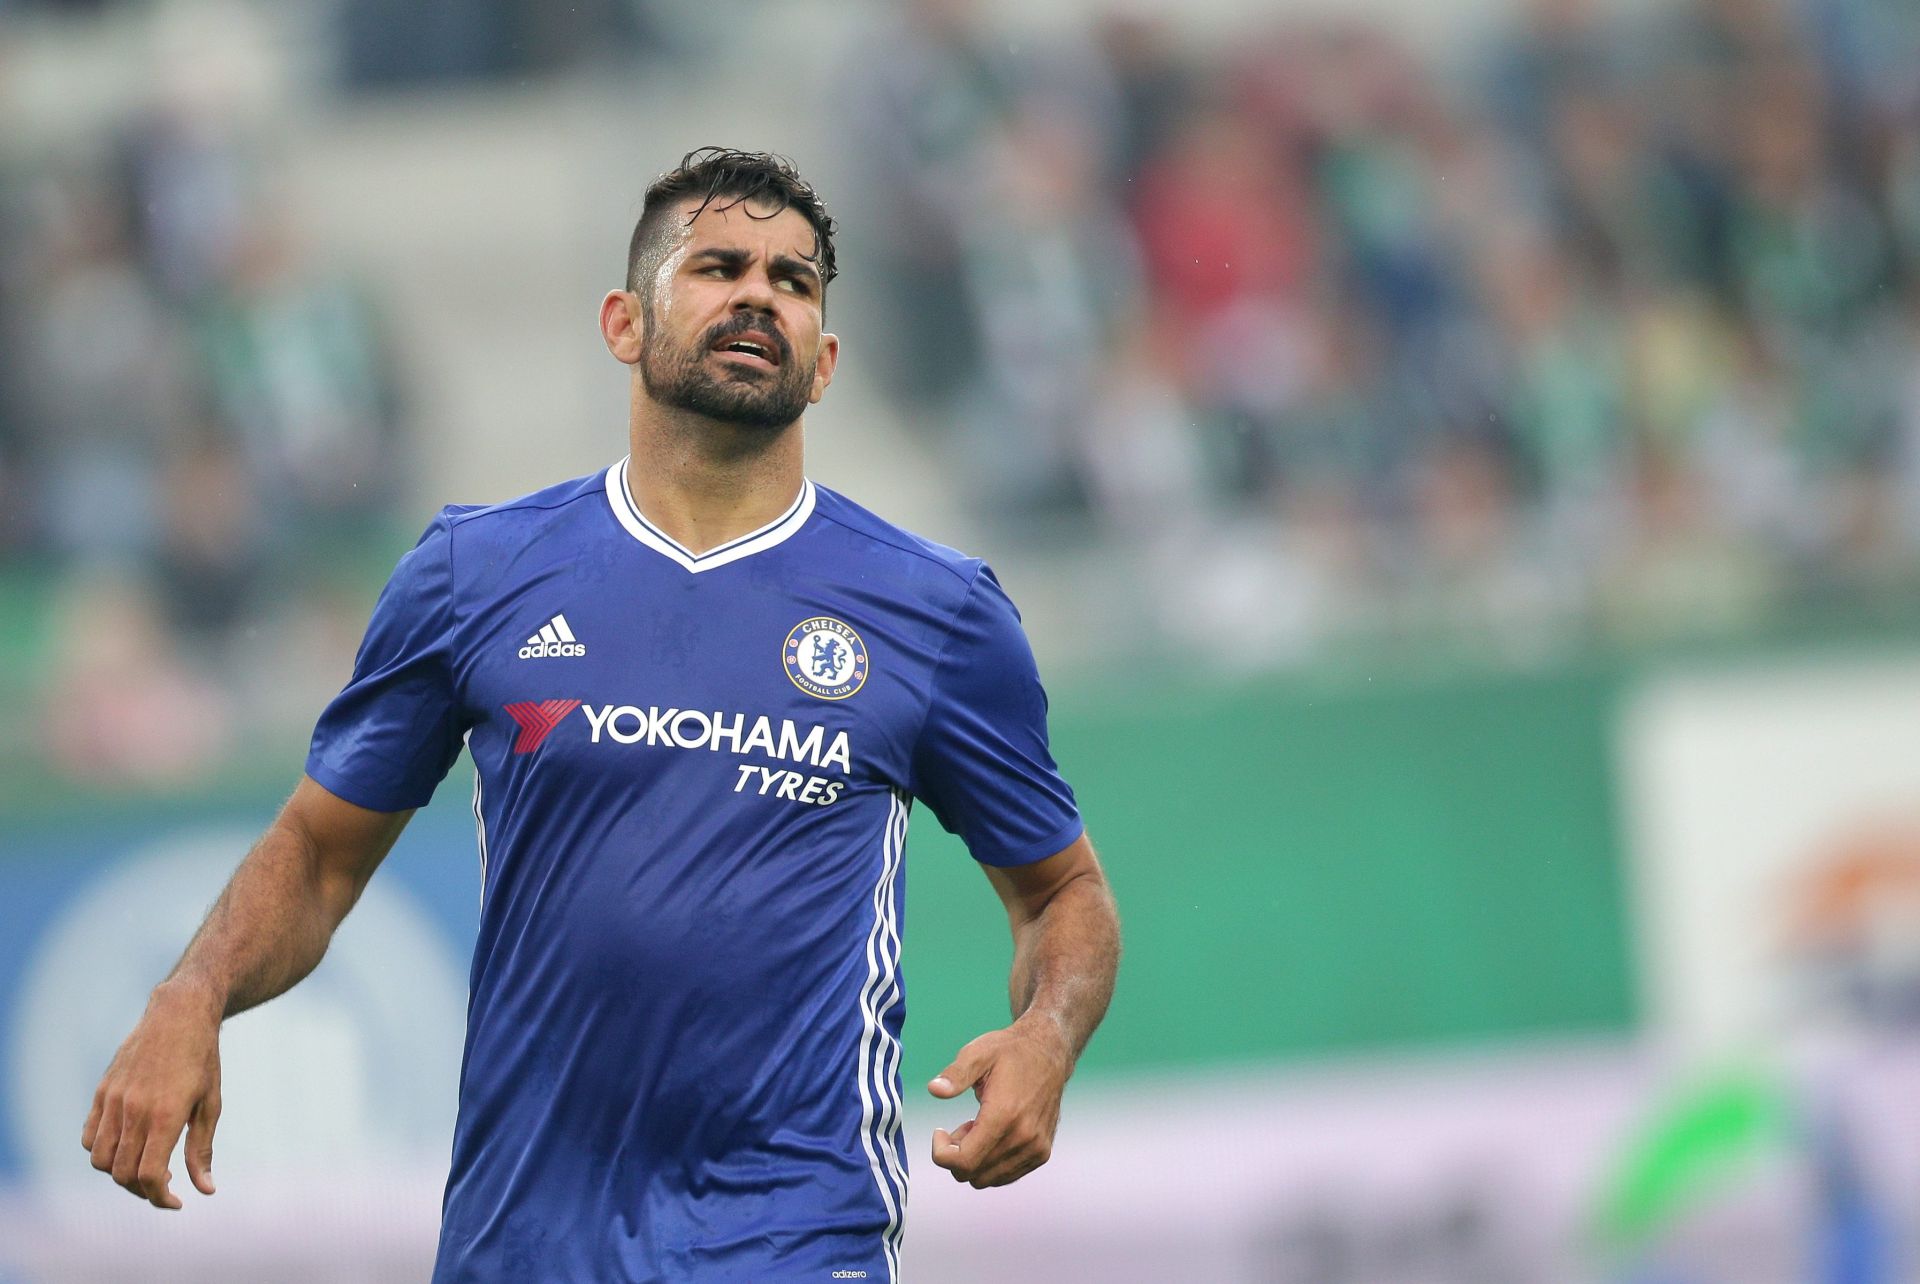 epa05428372 Chelsea FC's Diego Costa reacts during the friendly soccer match against SK Rapid Wien at the newly built Allianz Stadion in Vienna, Austria, 16 July 2016. SK Rapid Wien's new home side was officially opened today by a ceremony reaching its highlight in the soccer game agianst England's Chelsea FC.  EPA/LISI NIESNER